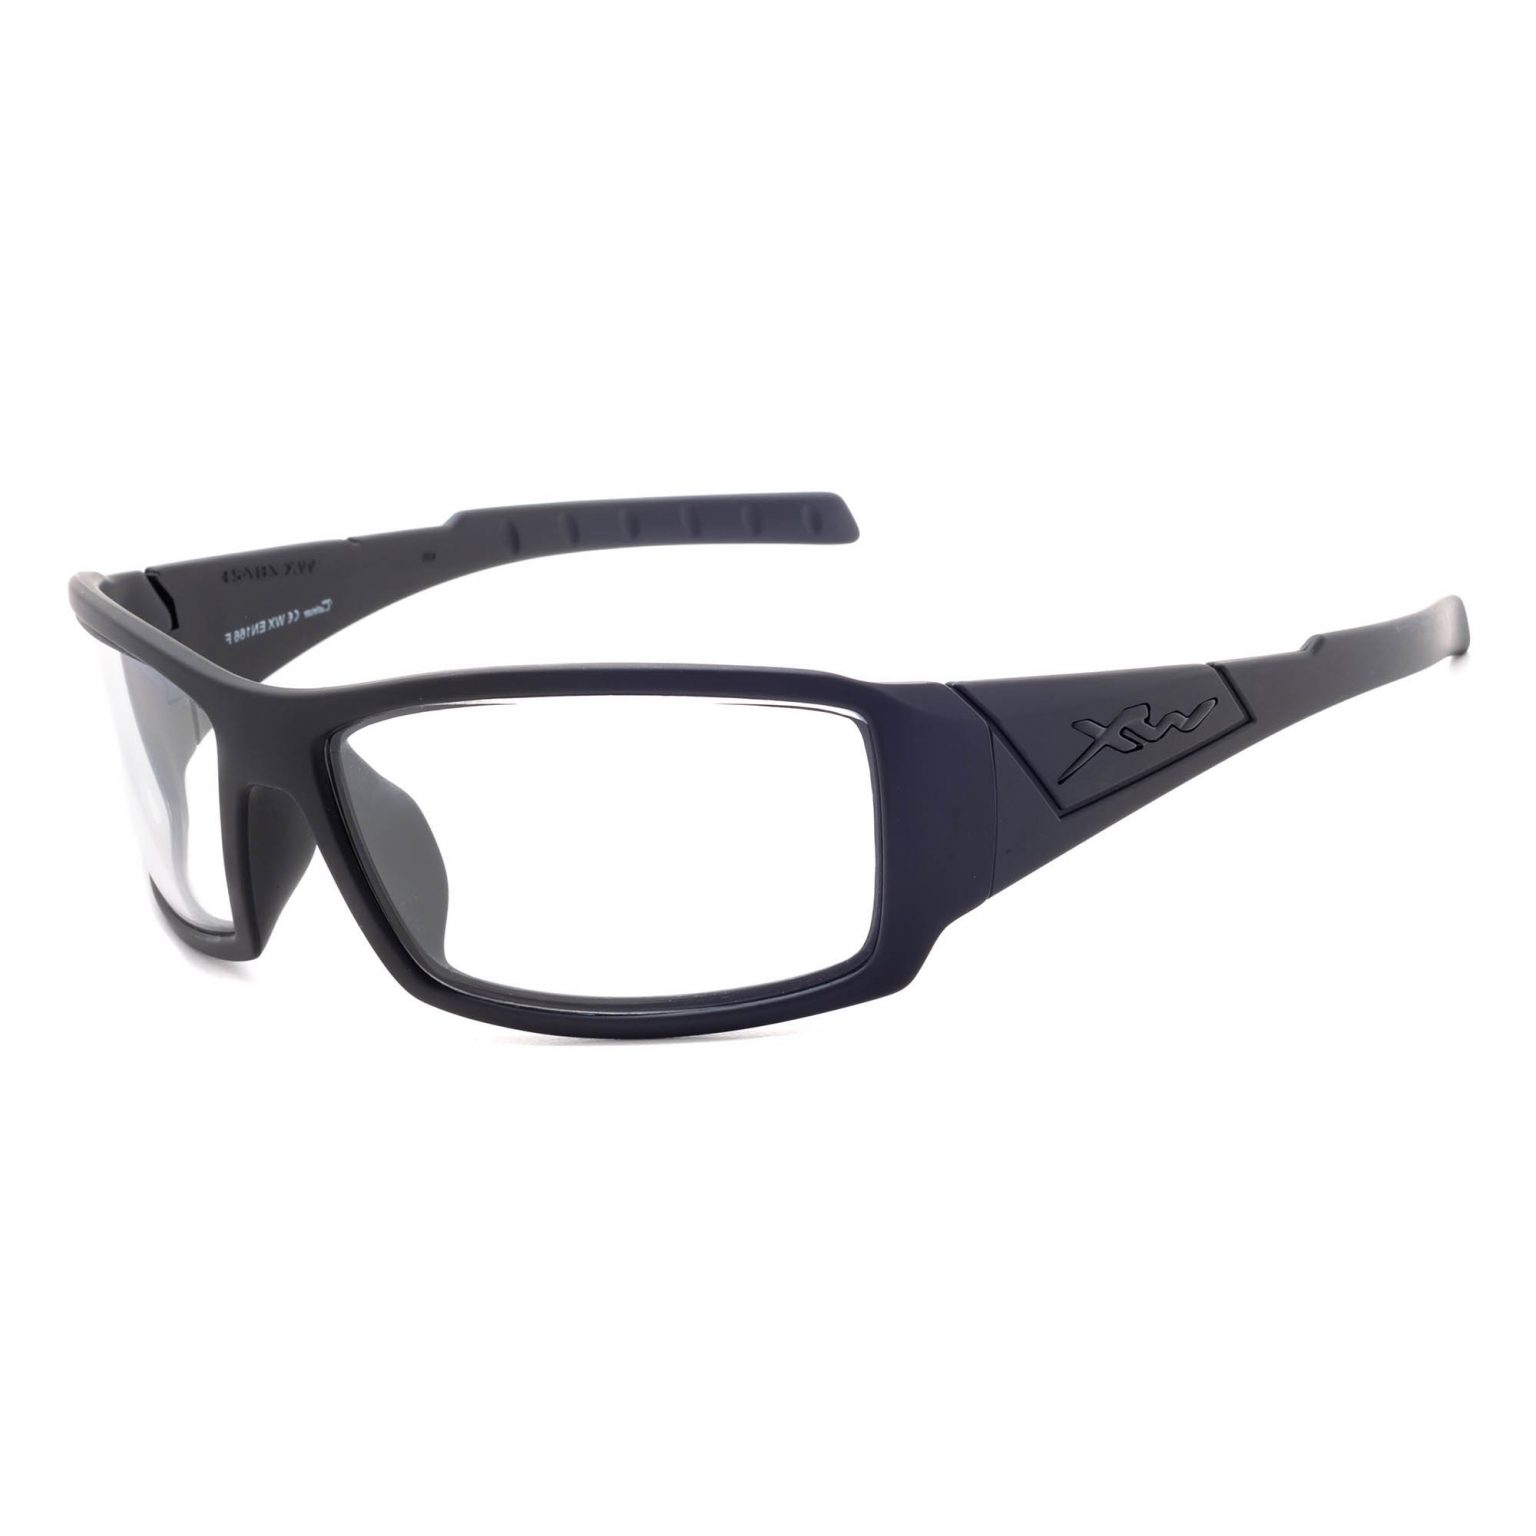 Wileyx Twisted Prescription Safety Glasses Safety Glasses X Ray